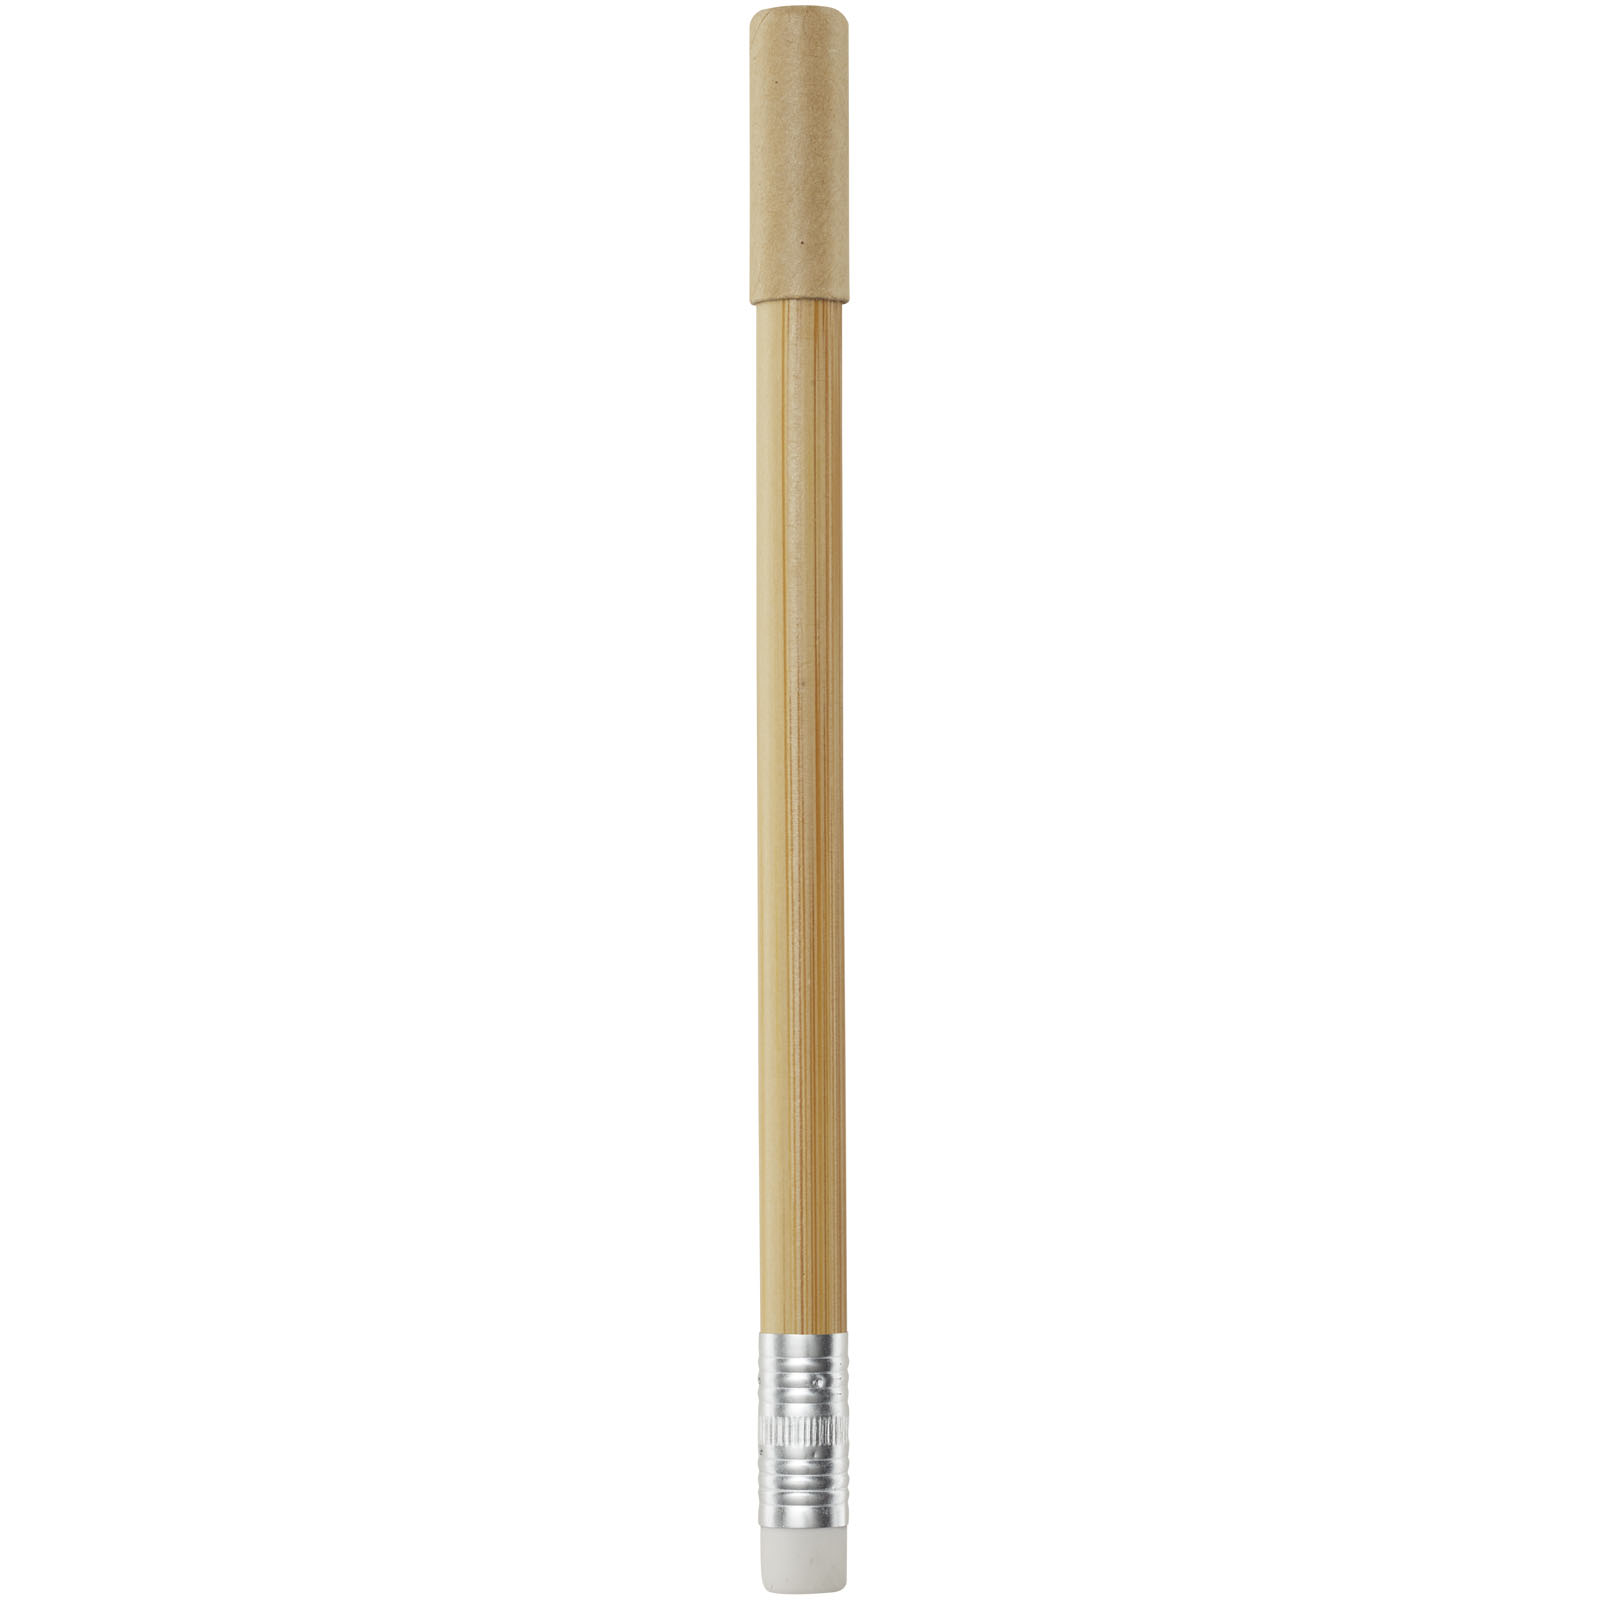 Advertising Other Pens & Writing Accessories - Krajono bamboo inkless pen 